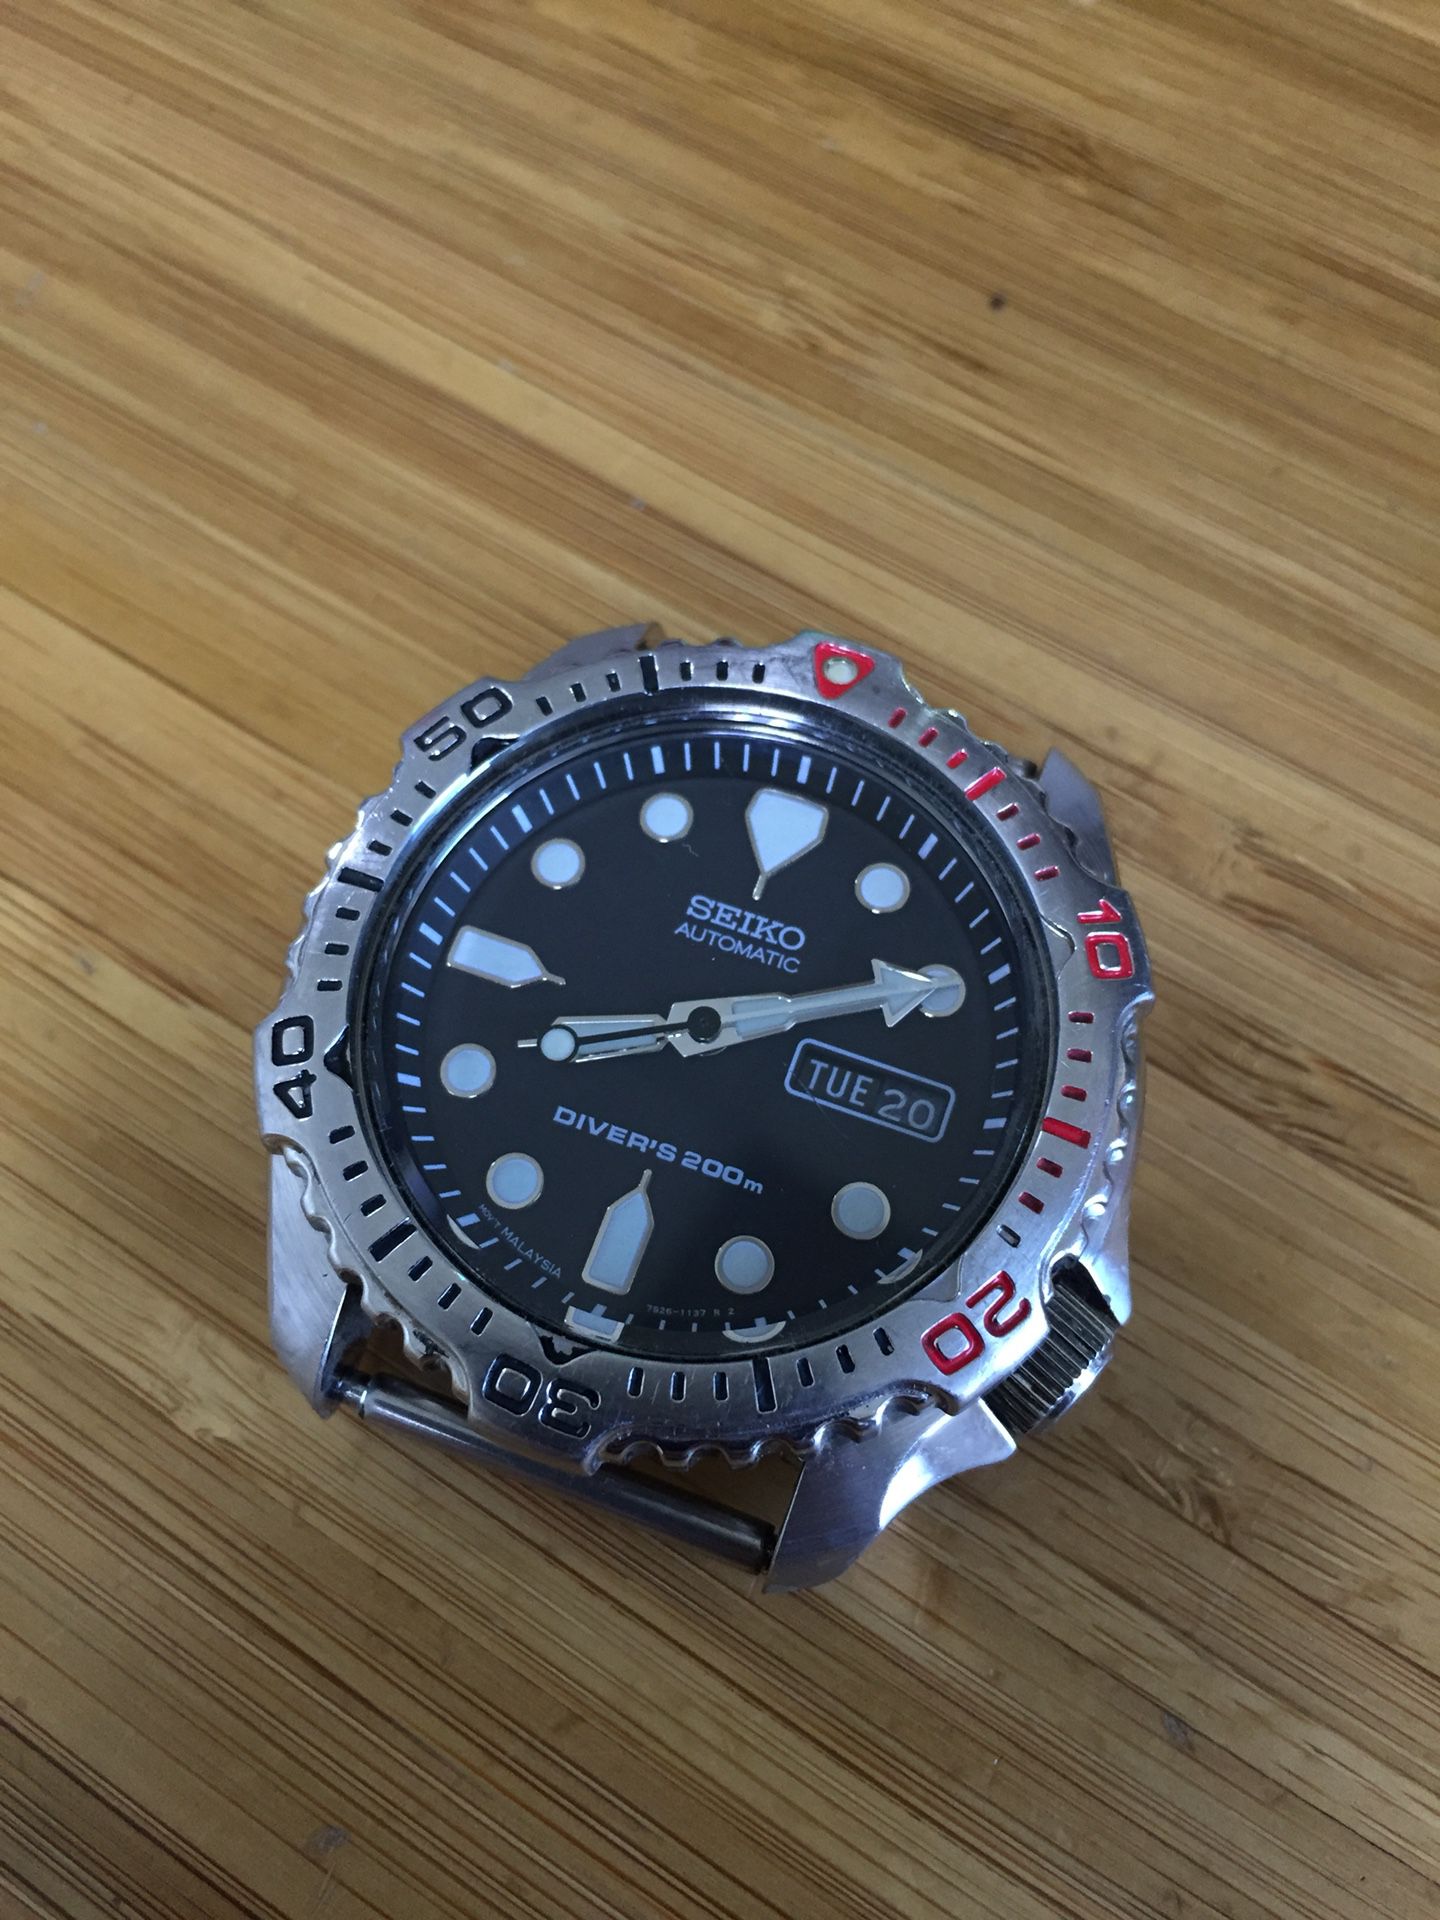 Seiko 7s26-7020 watch for Sale in Fort Lauderdale, FL - OfferUp